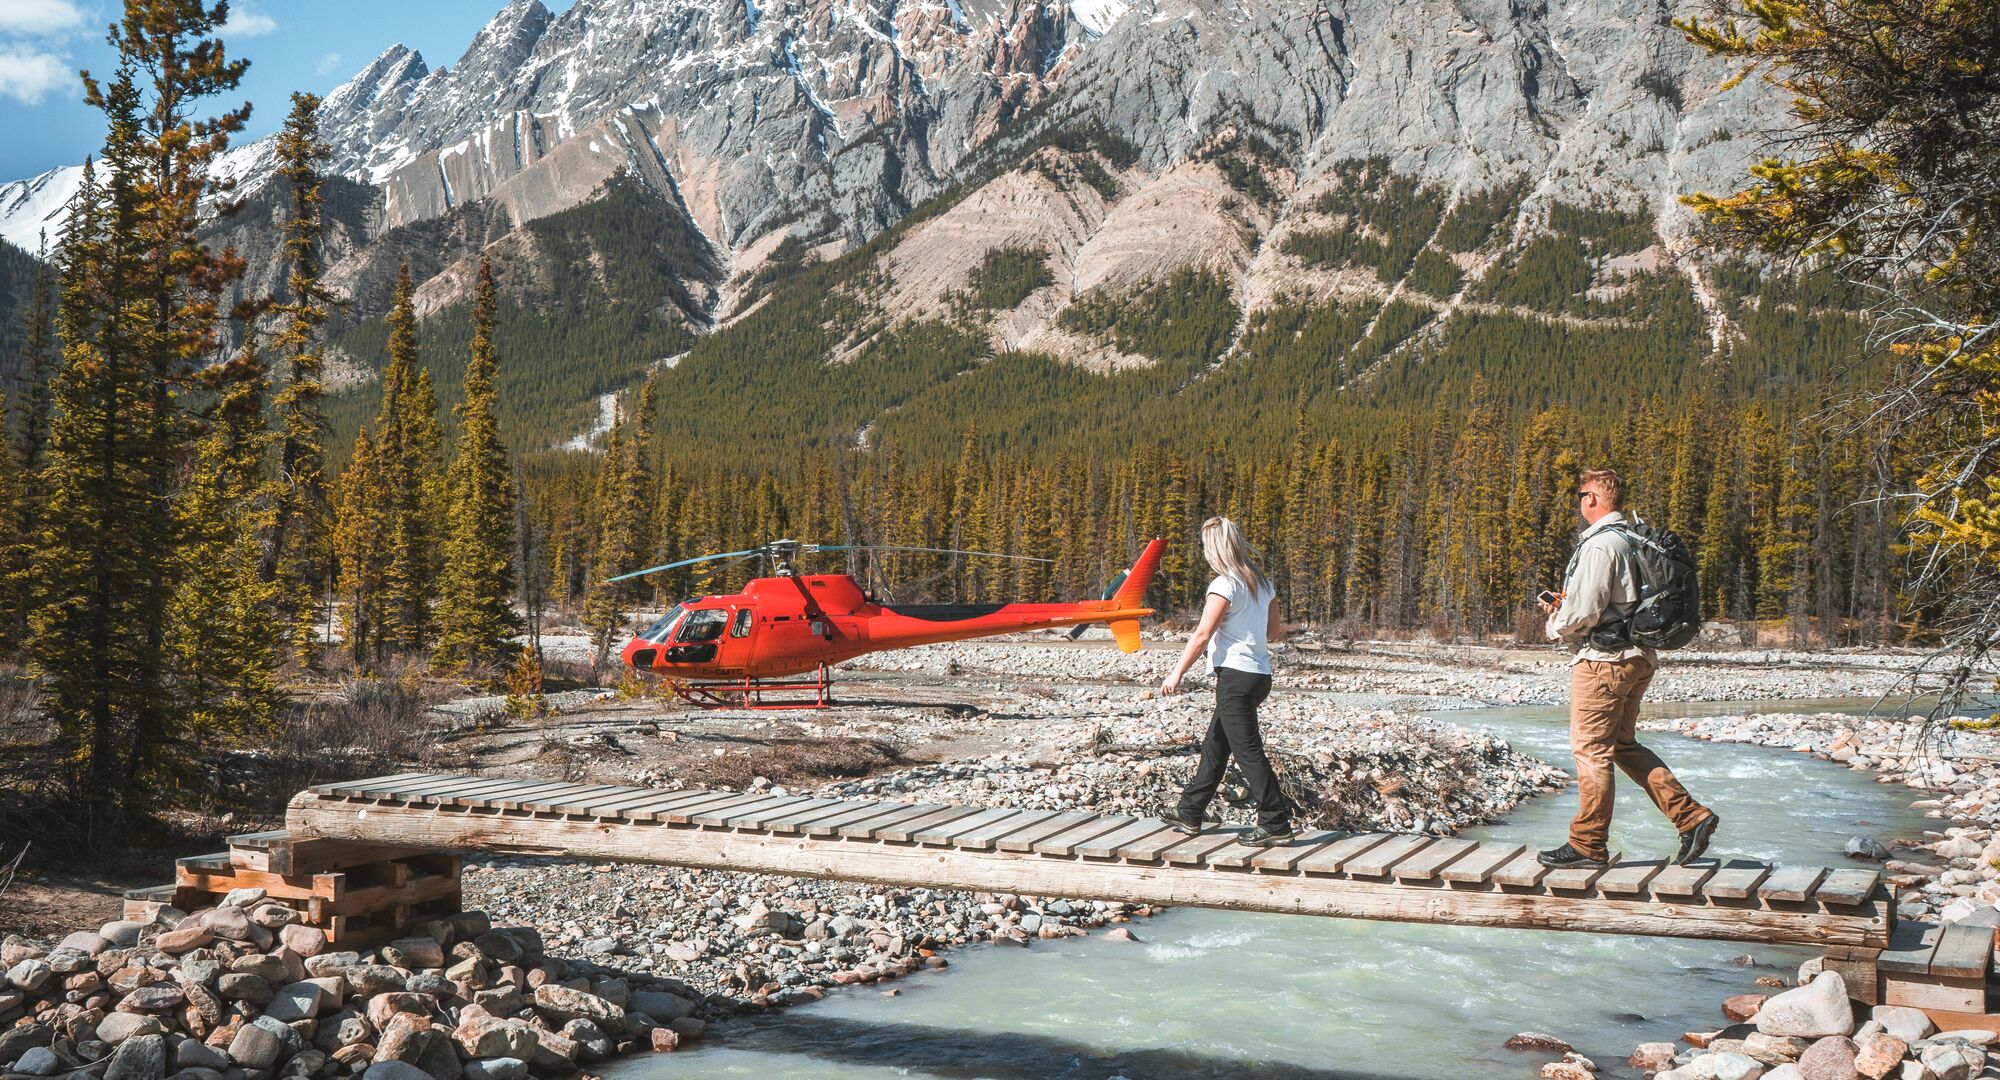 Heli-Hiking the Icefields Parkway